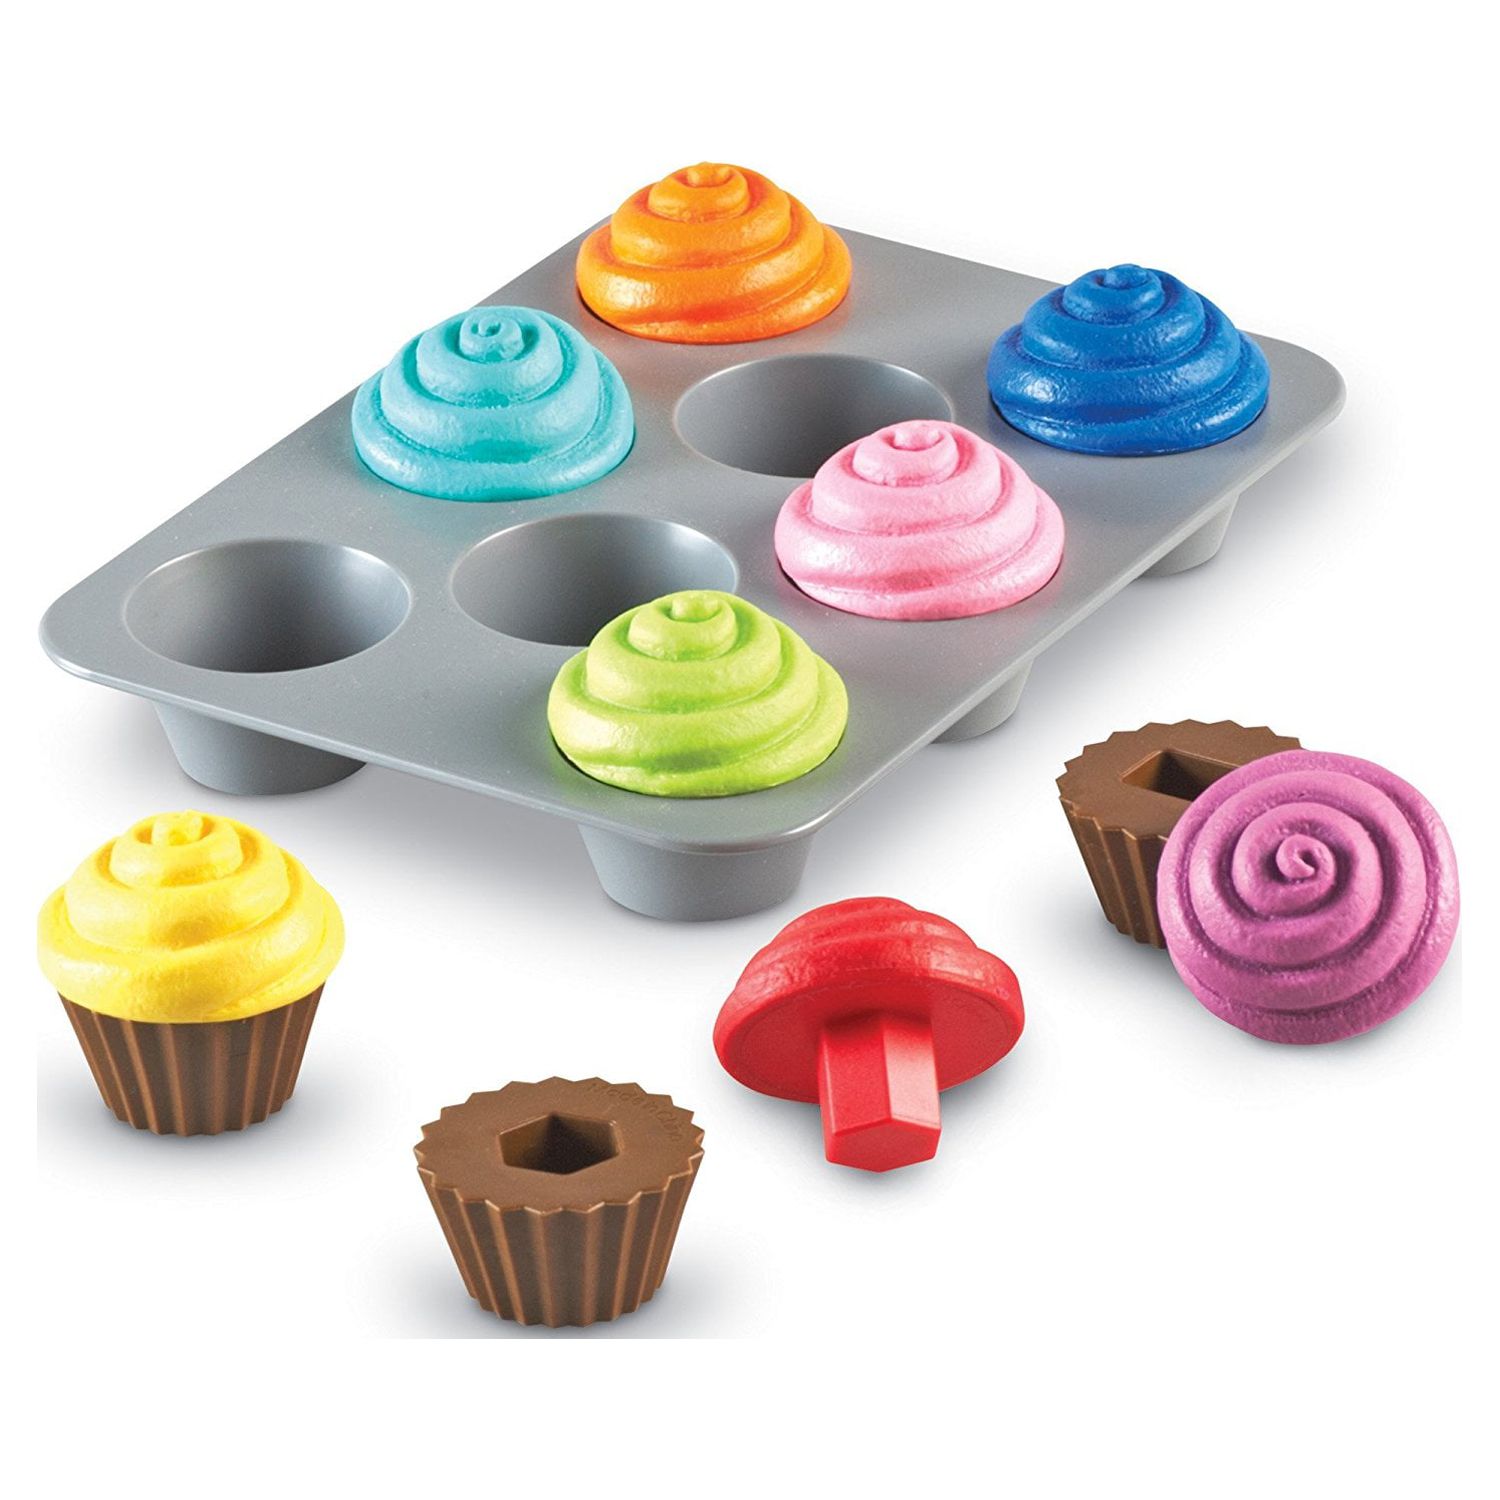 Learning Resources Smart Snacks® Shape Sorting Cupcakes - 9 Pieces, Boys and Girls Ages 2+, Educational Learning, Toddler Learning Toy - image 1 of 6